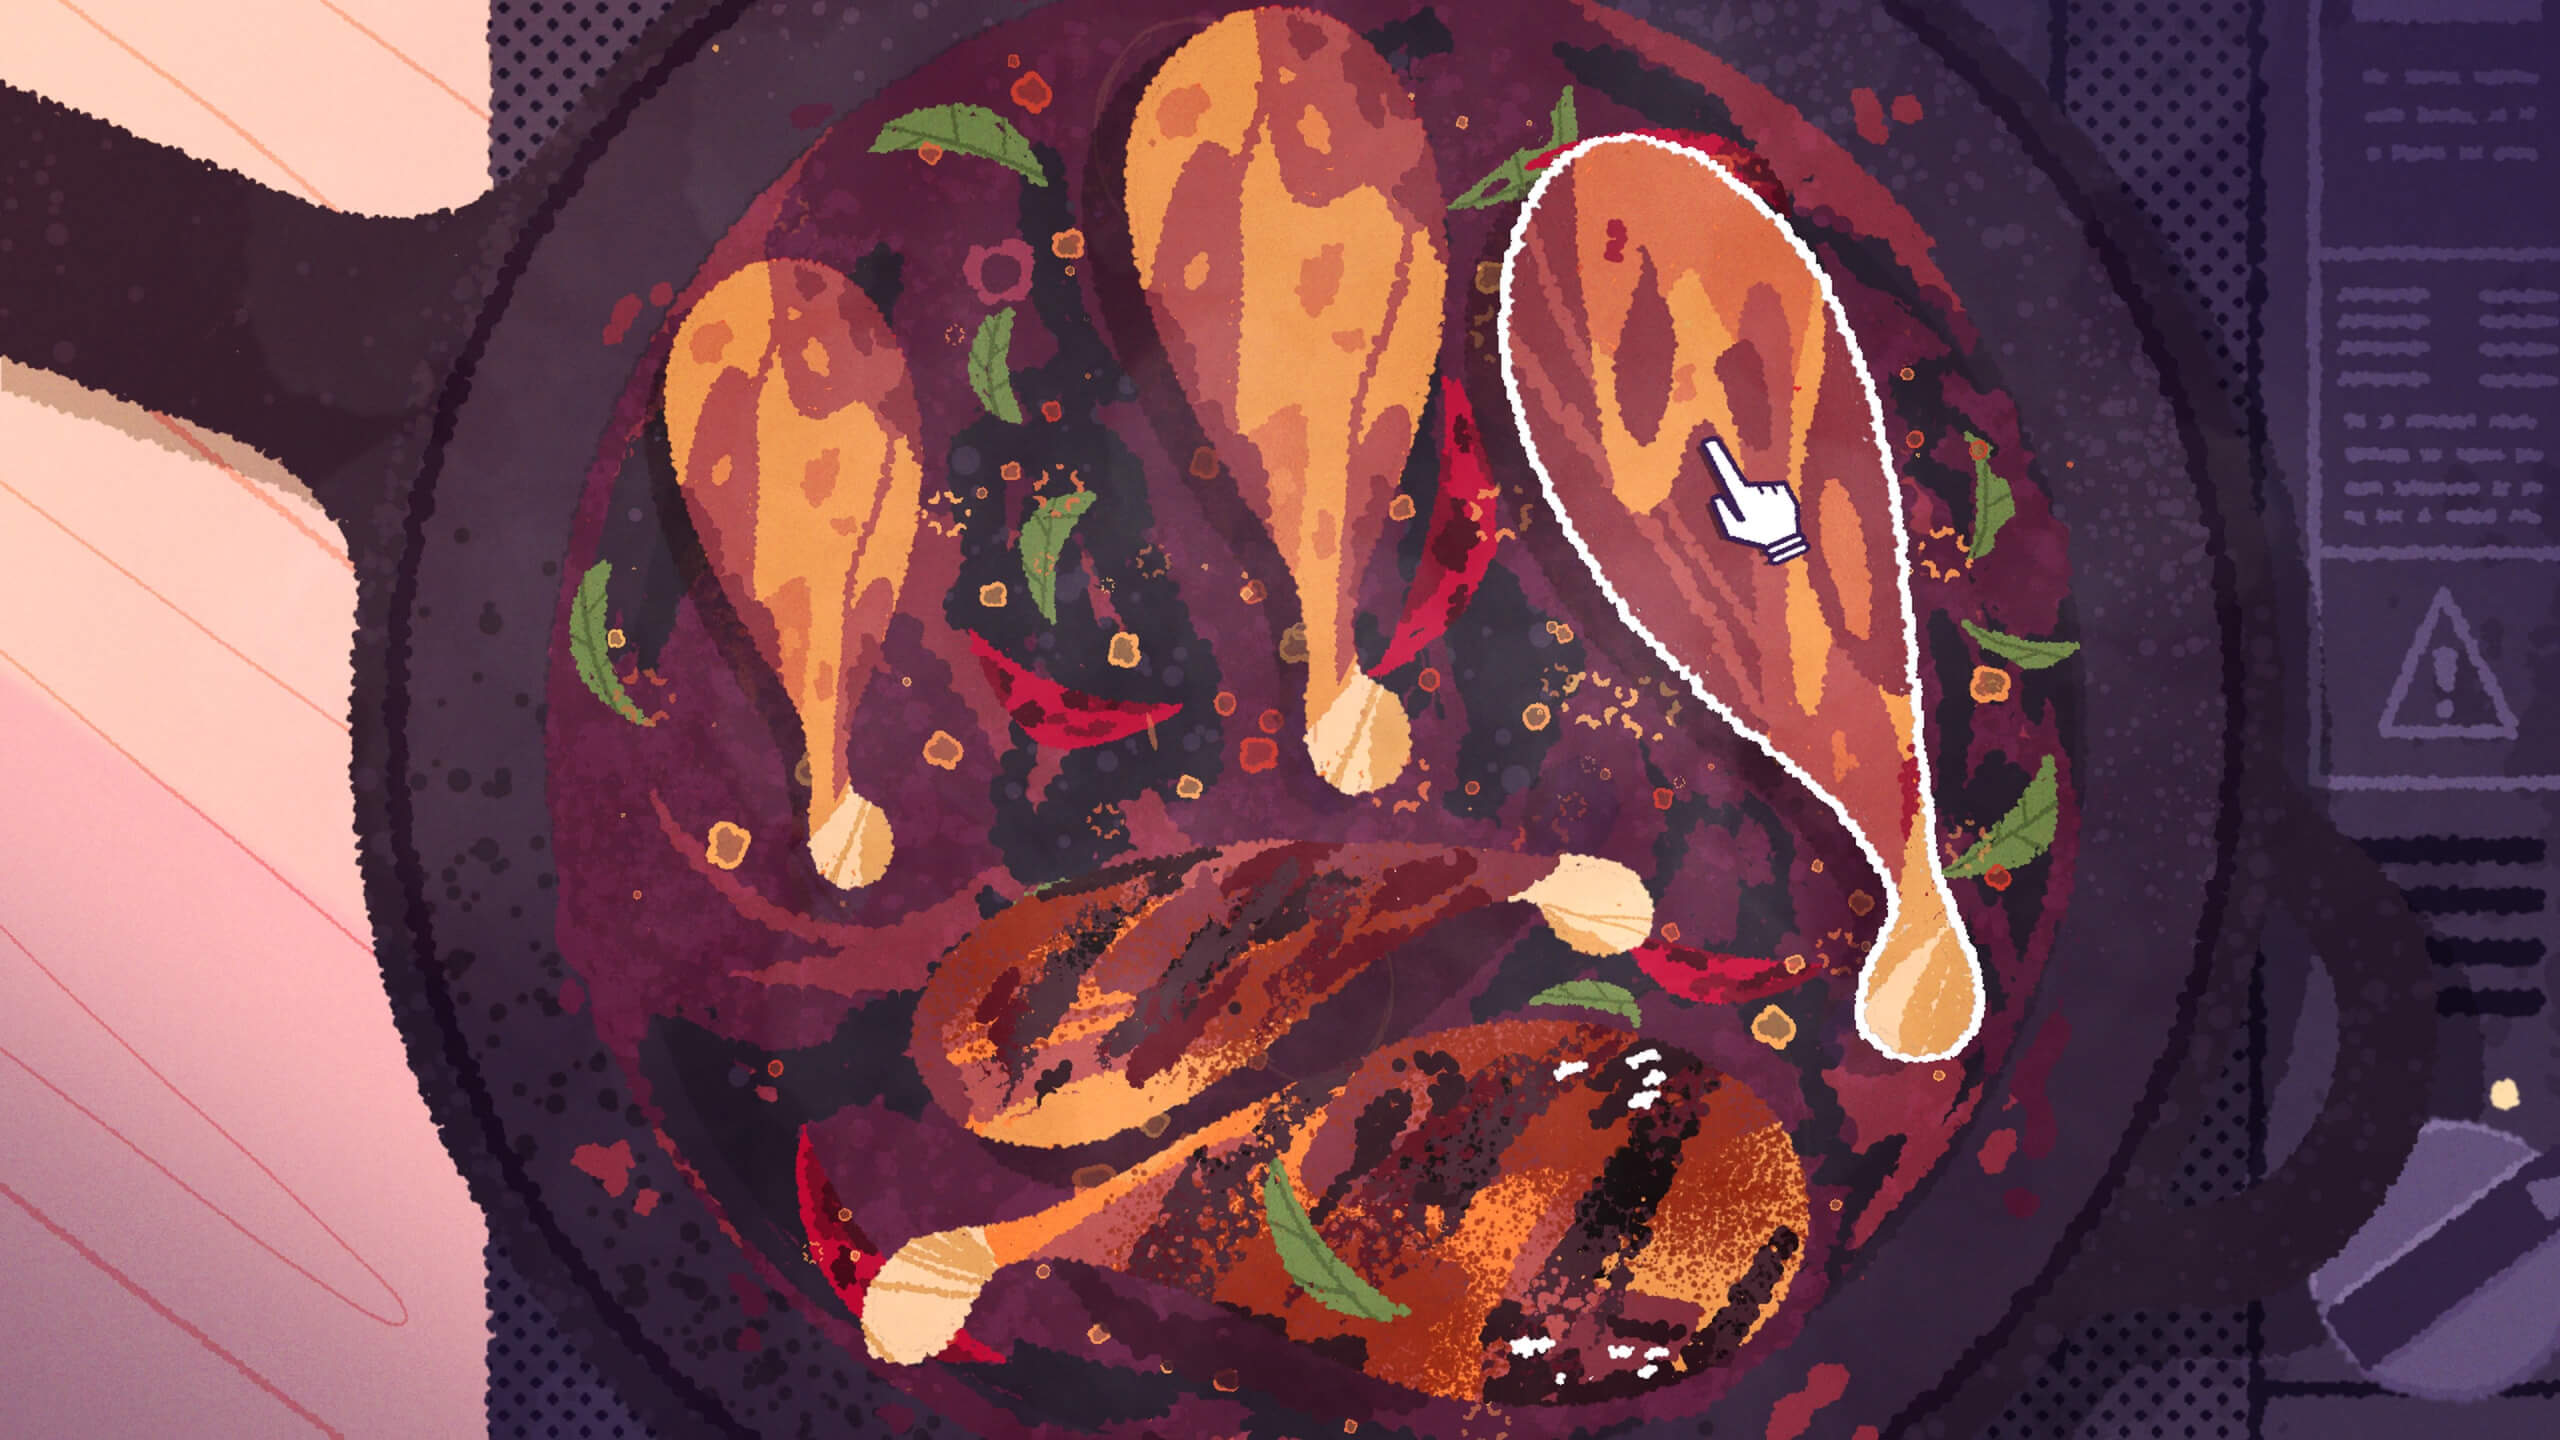 A cartoon style picture of a cooking scene in Venba. A black frying pan atop a portable stove. Inside the frying pan there are 5 chicken drumsticks, along with red chillies and green mint leaves. 2 of the drum sticks are well charred from cooking and bubbles are shown forming and popping in the oil.